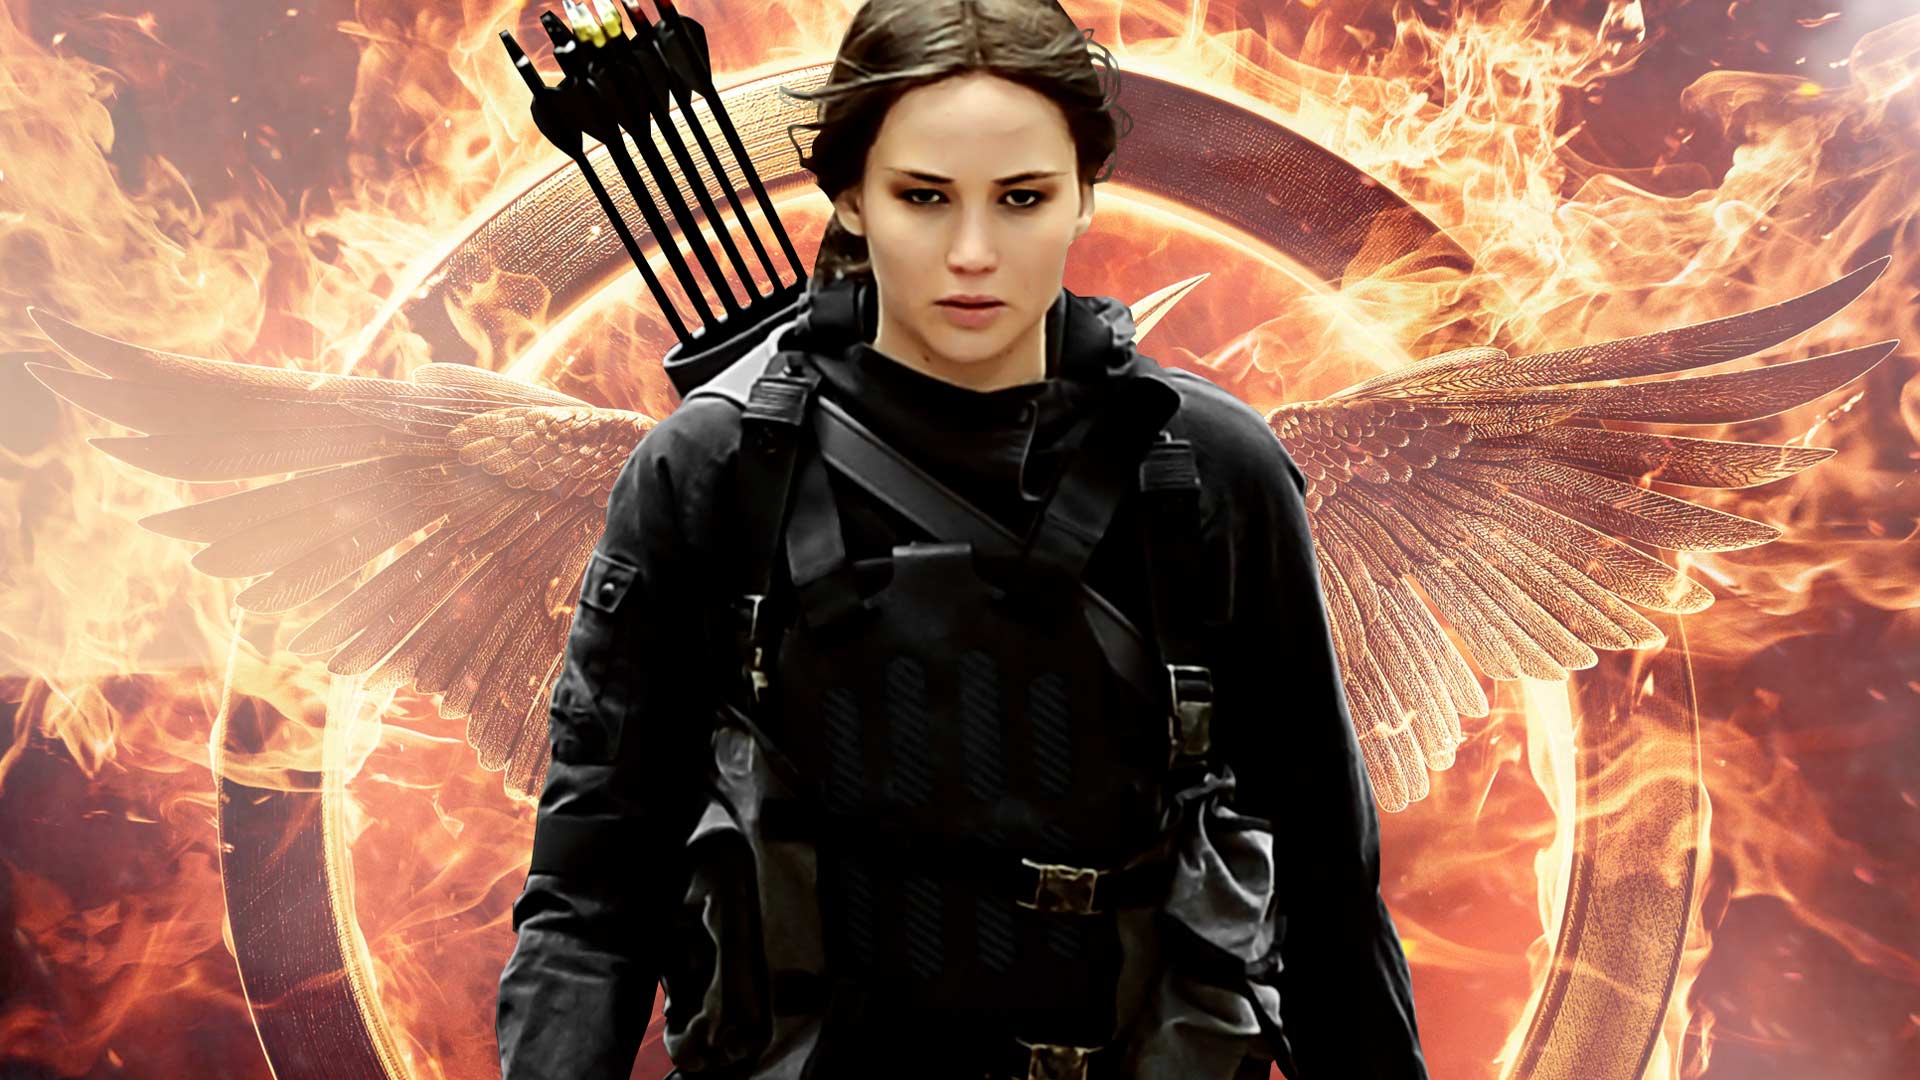 HQ The Hunger Games: Mockingjay - Part 1 Wallpapers File 232.87Kb. 